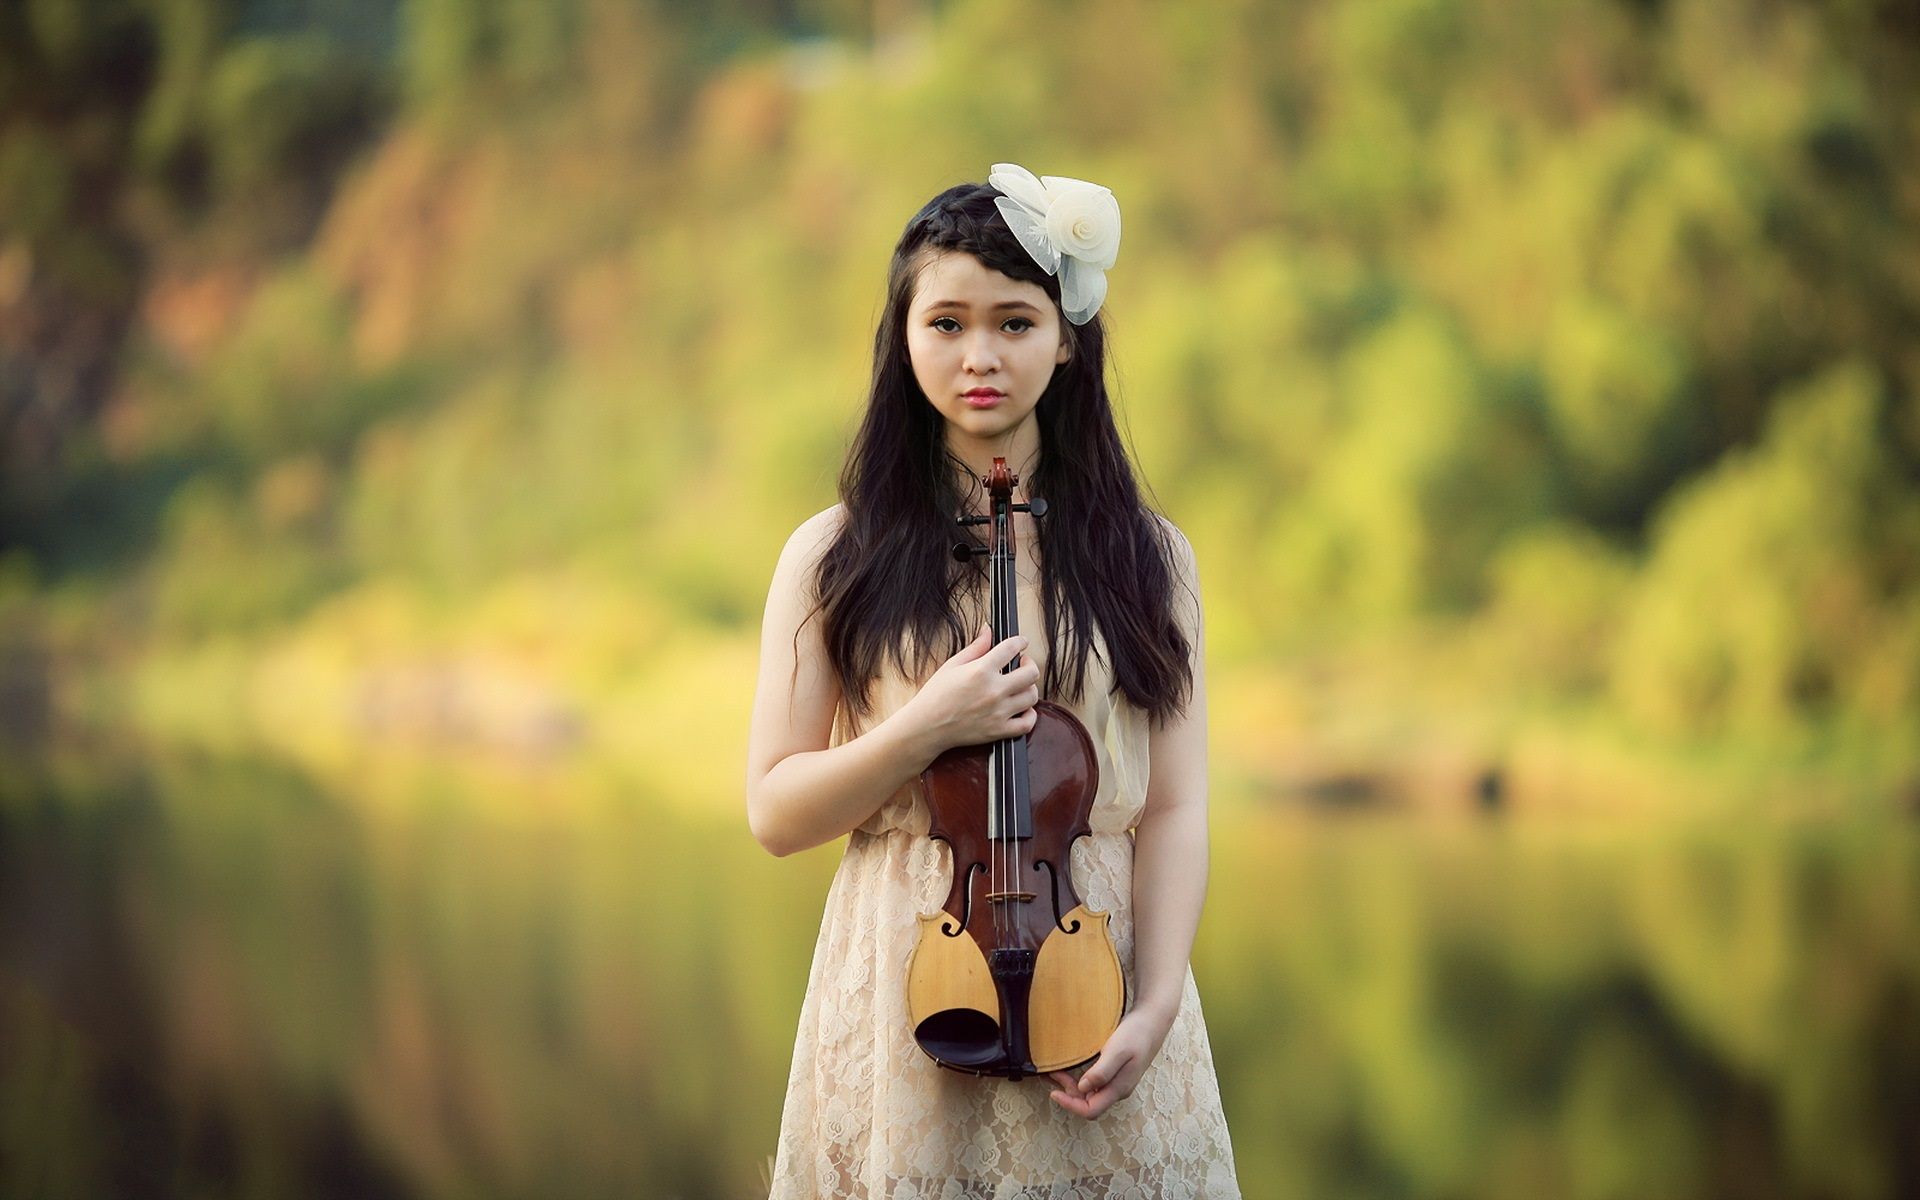 Beautiful Asian Girl, Violin, Music 640x1136 IPhone 5 5S 5C SE Wallpaper, Background, Picture, Image